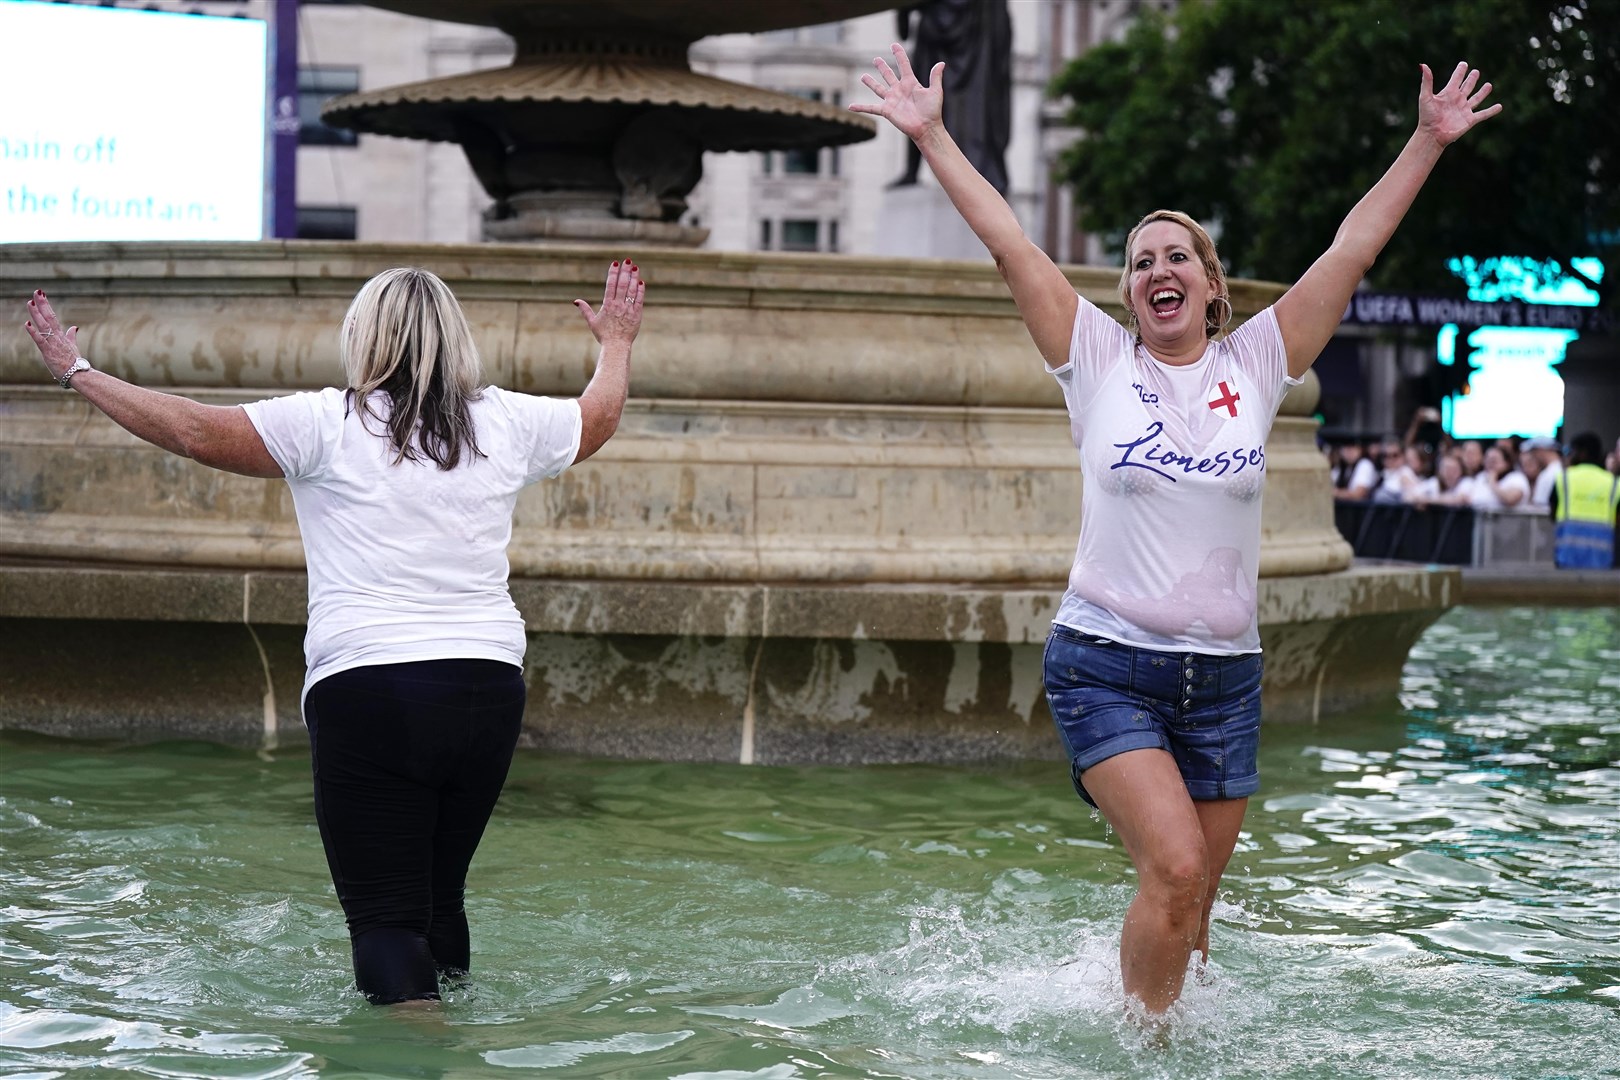 Fans celebrate the final whistle in Trafalgar Square, London (Aaron Chown/PA) 